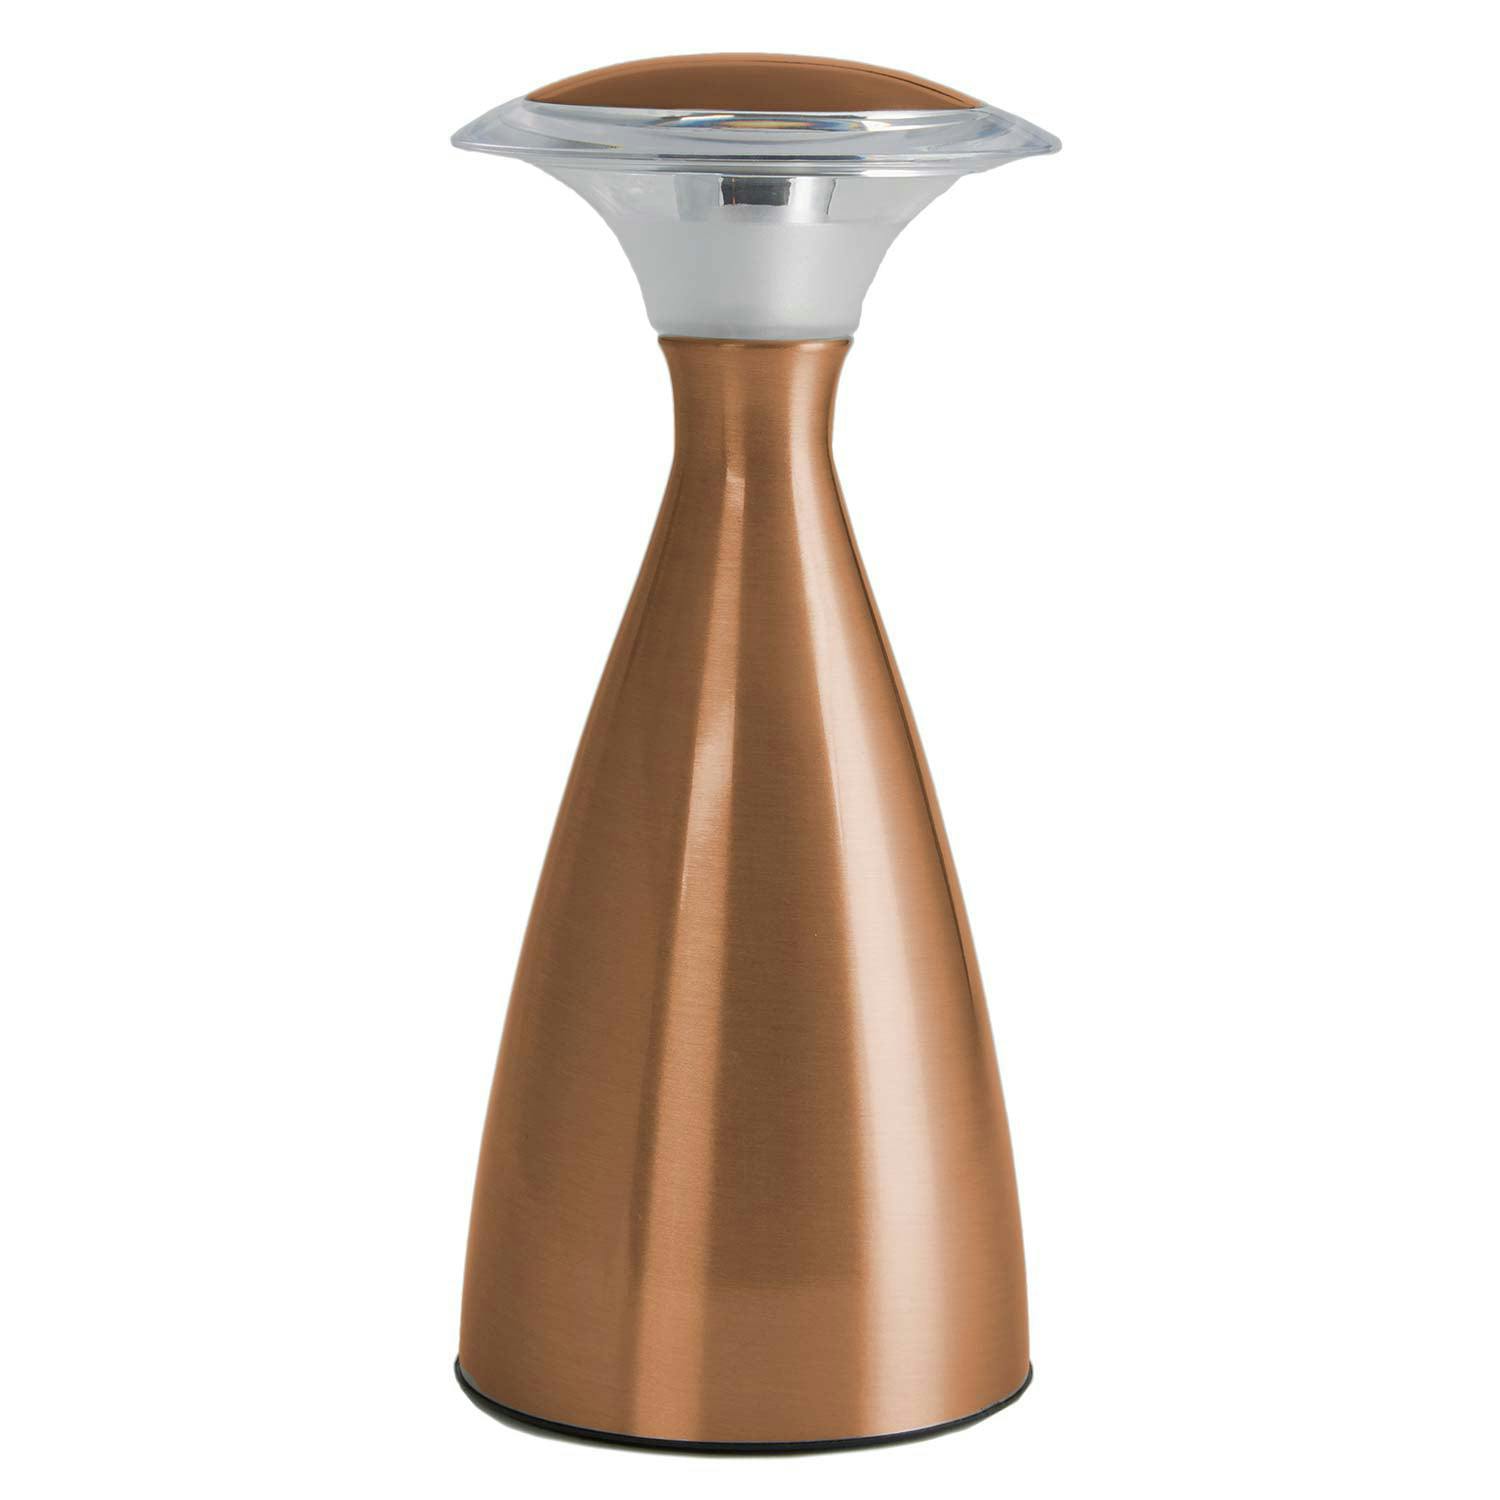 Copper Touch Lantern LUX Cordless Lamp for Outdoor & Nursery